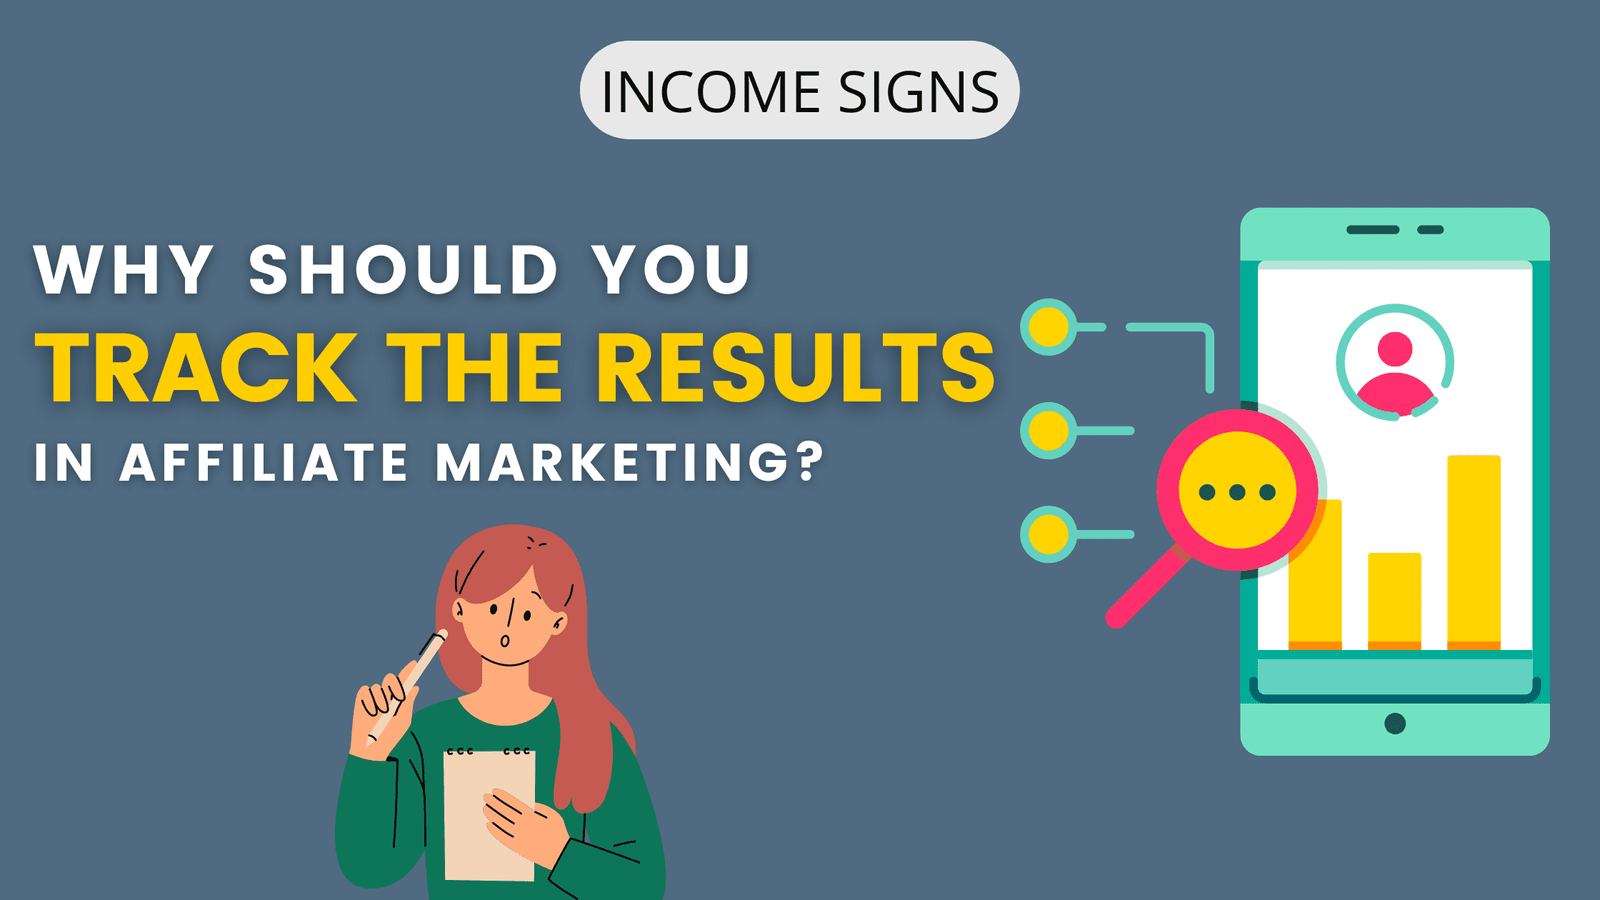 Why Should You Track The Results in Affiliate Marketing?